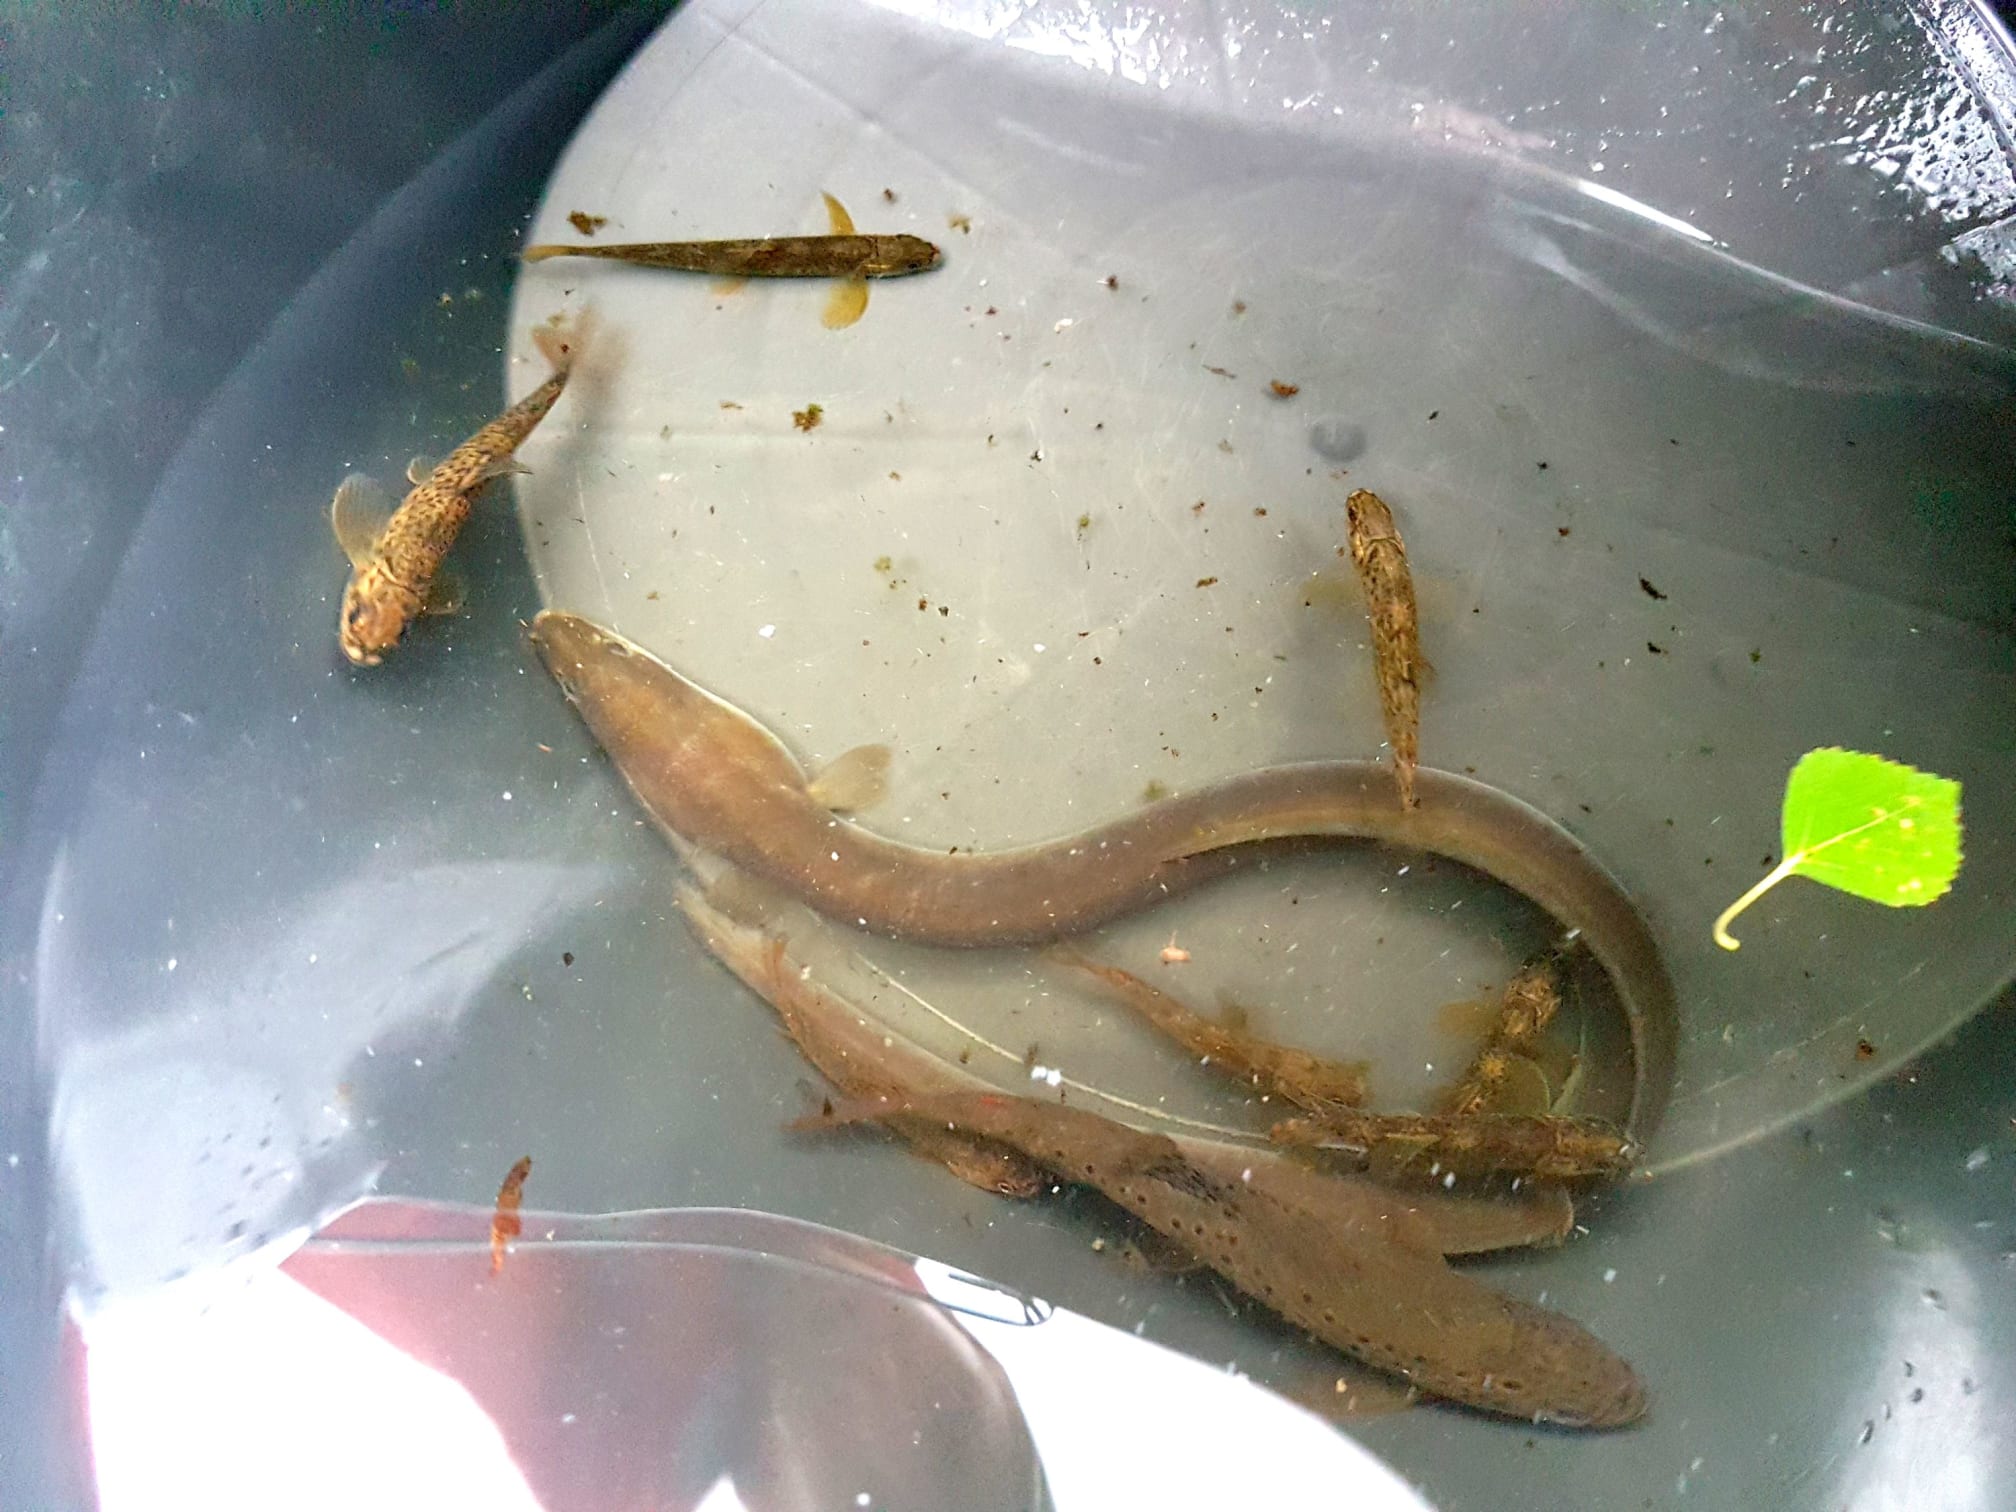 Some of the fish caught from the gravel introduction site - salmon fry, adult trout, trout fry and an eel.